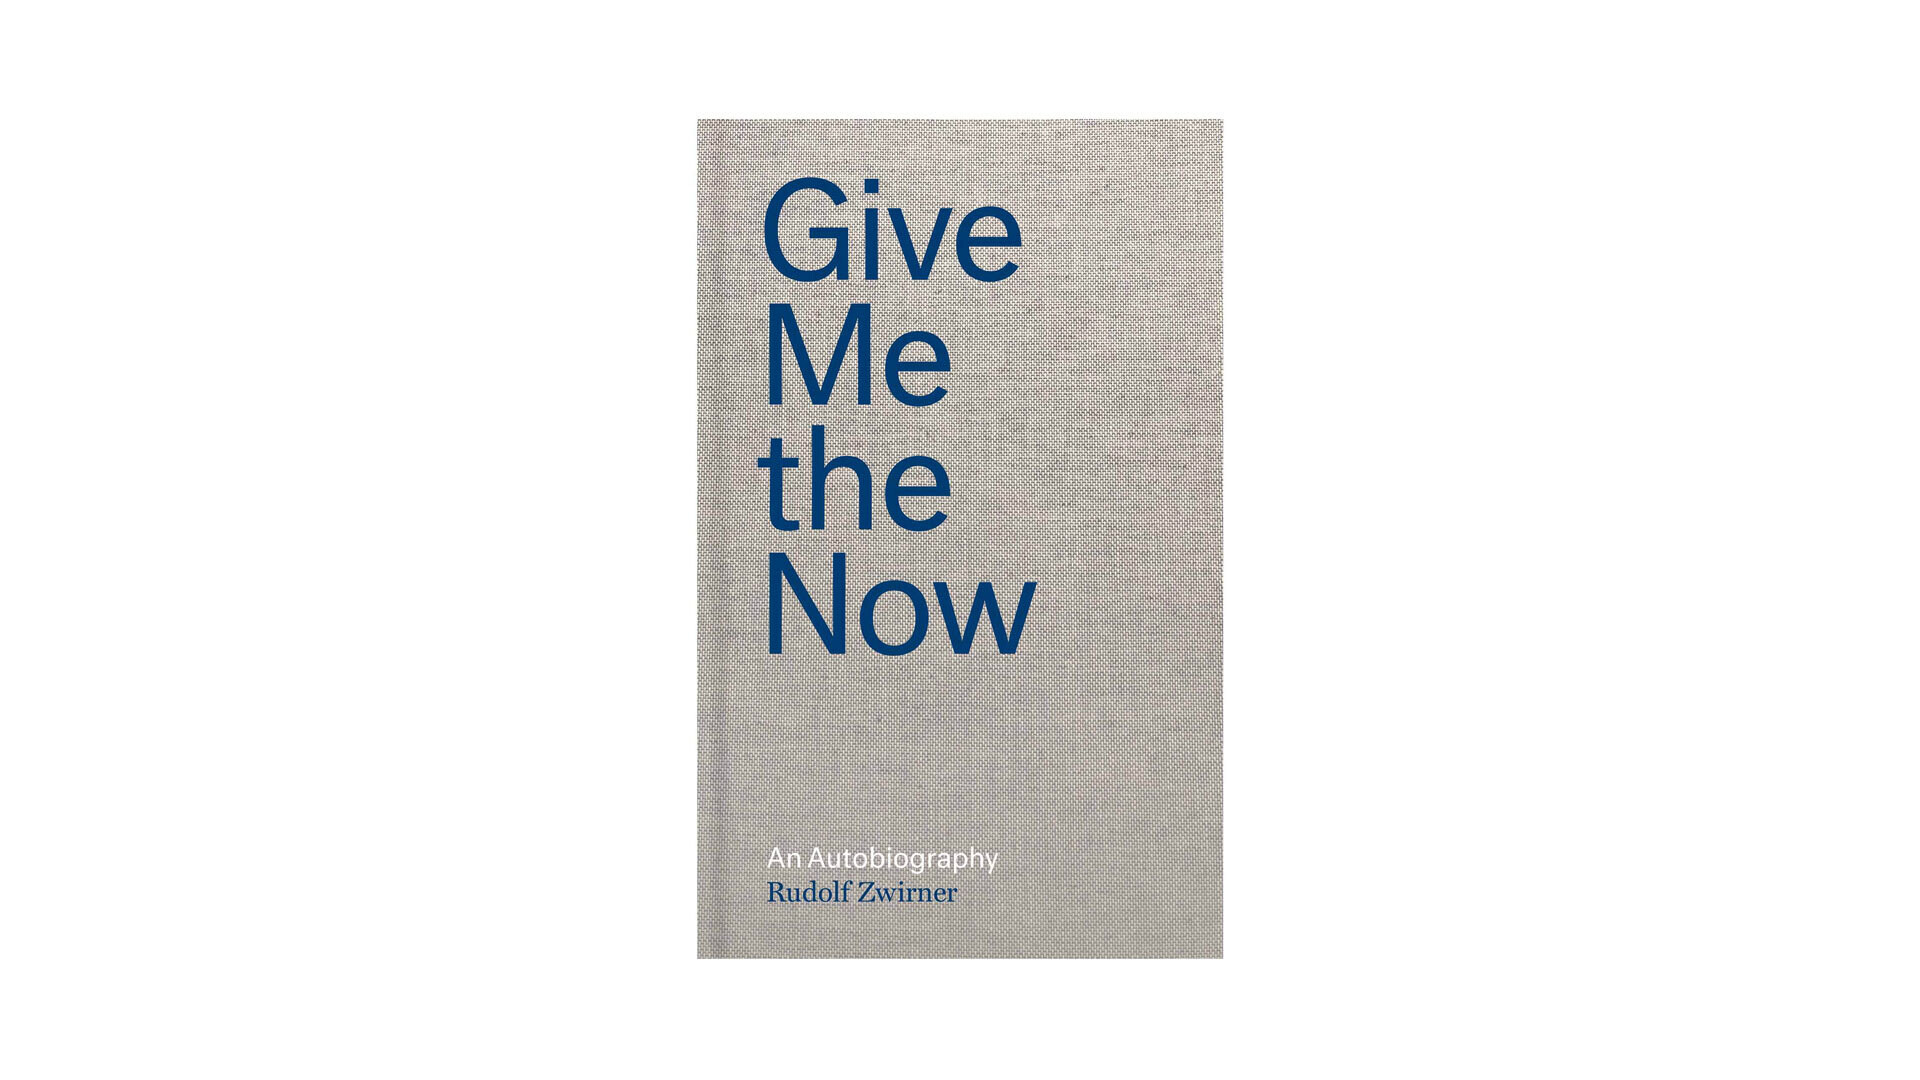 Cover of Give Me the Now an autobiography by Rudolf Zwirner published by David Zwirner Books on January 12, 2021.